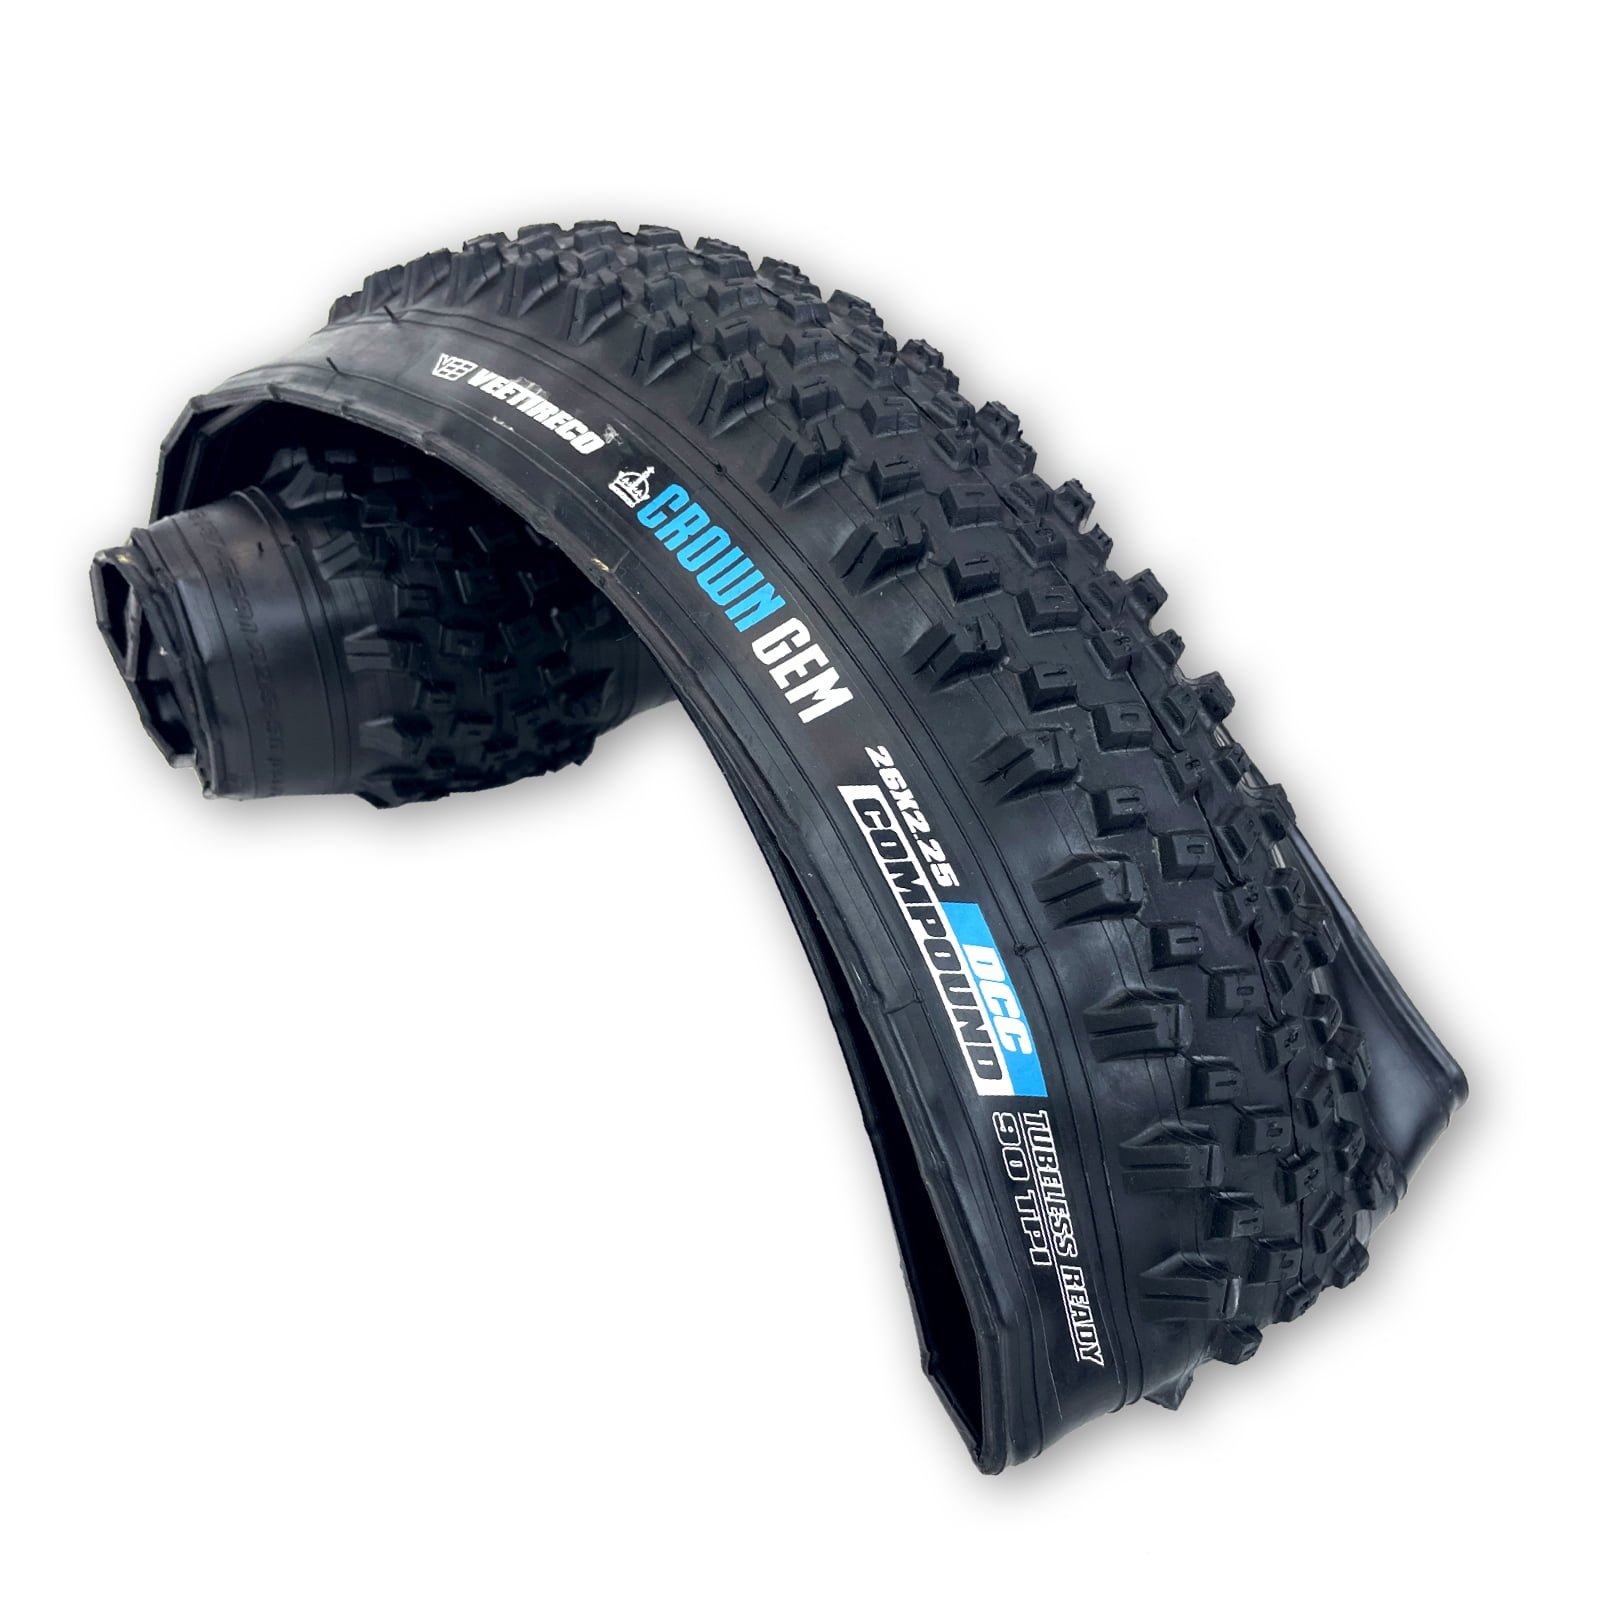 Vee Tire Crown GEM 20x2.25 Bike Tires with Multi Purpose Compound and  Wire Beads. 20 inch MTB Mountain Bike Tire.（並行輸入品） 通販